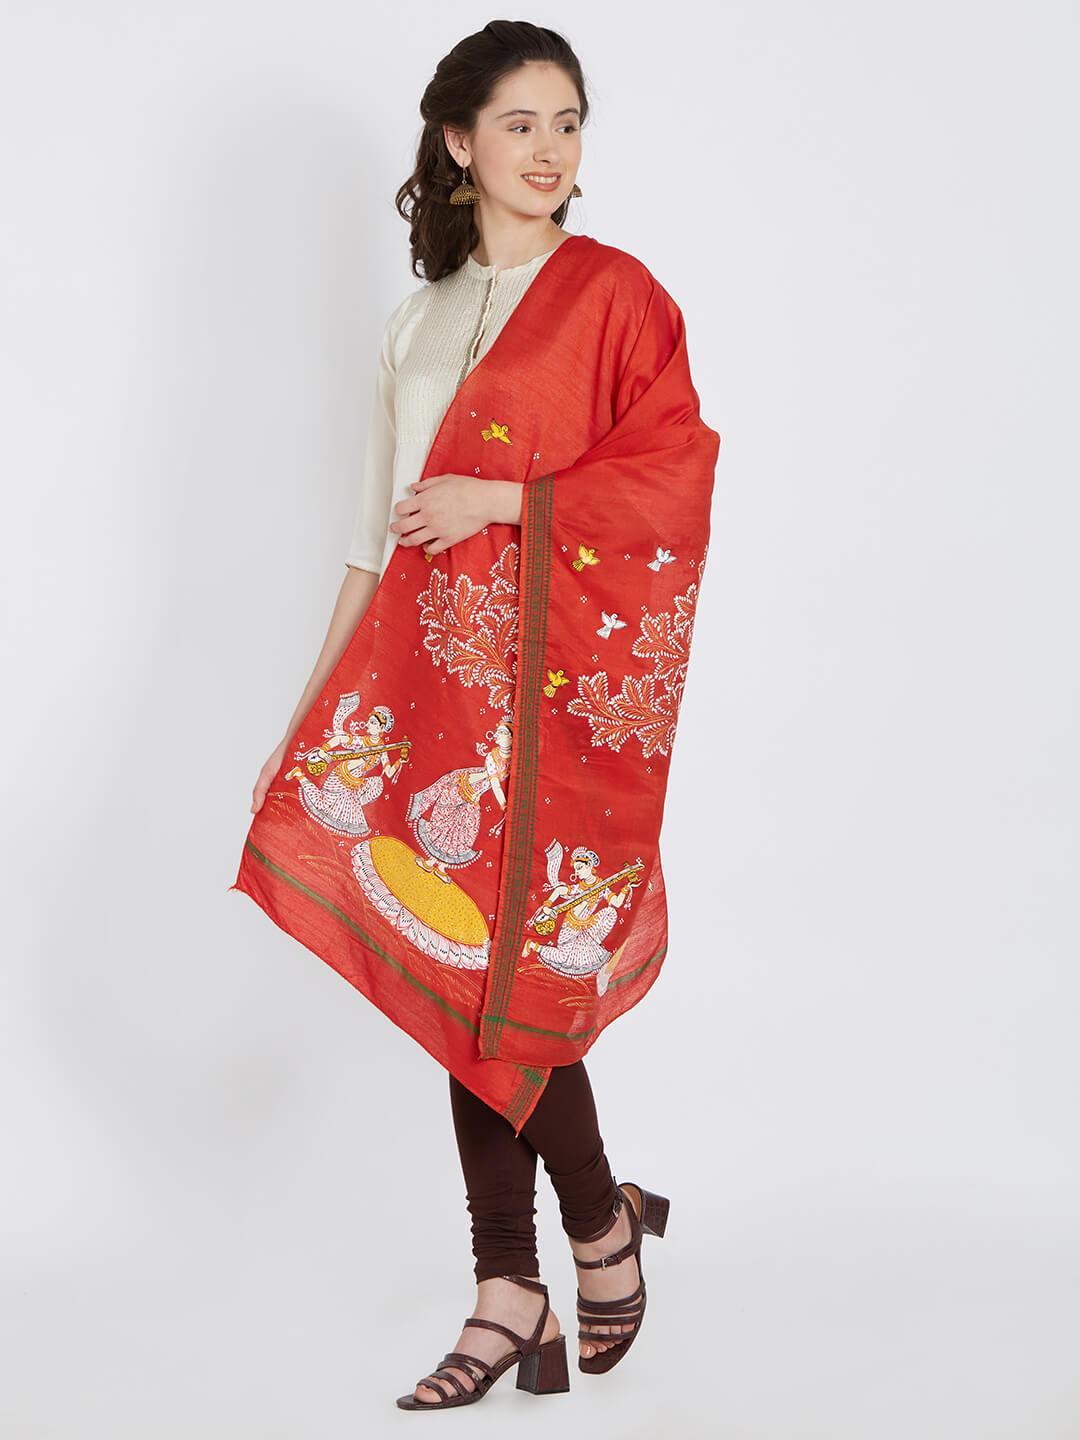 CraftsCollection.in - Red Silk Stole with Pattachitra Motifs